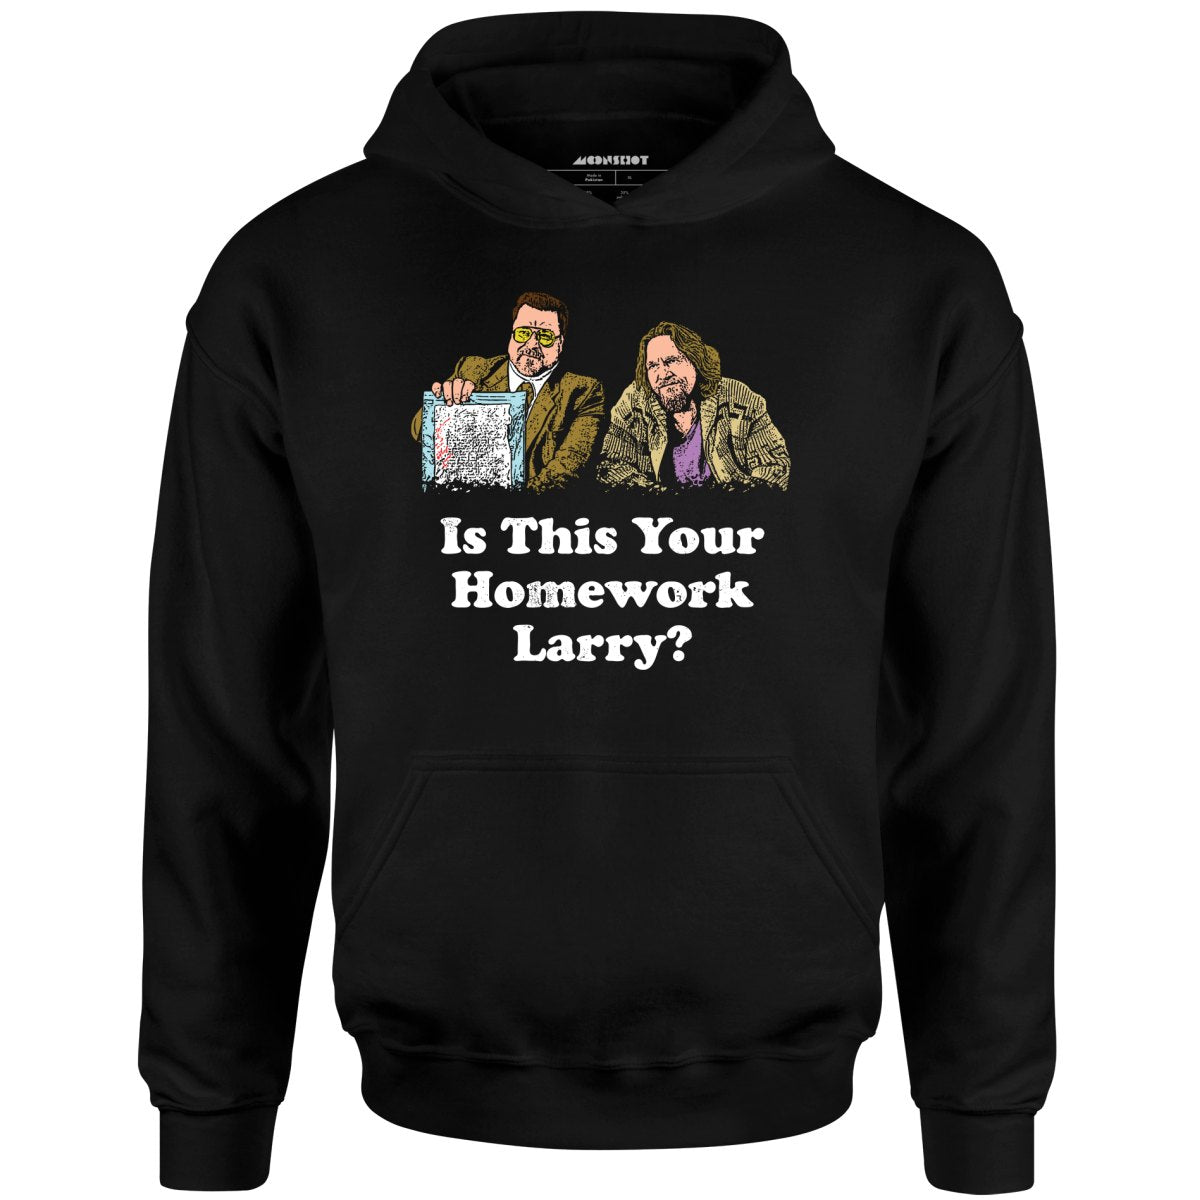 Is This Your Homework, Larry? - Unisex Hoodie